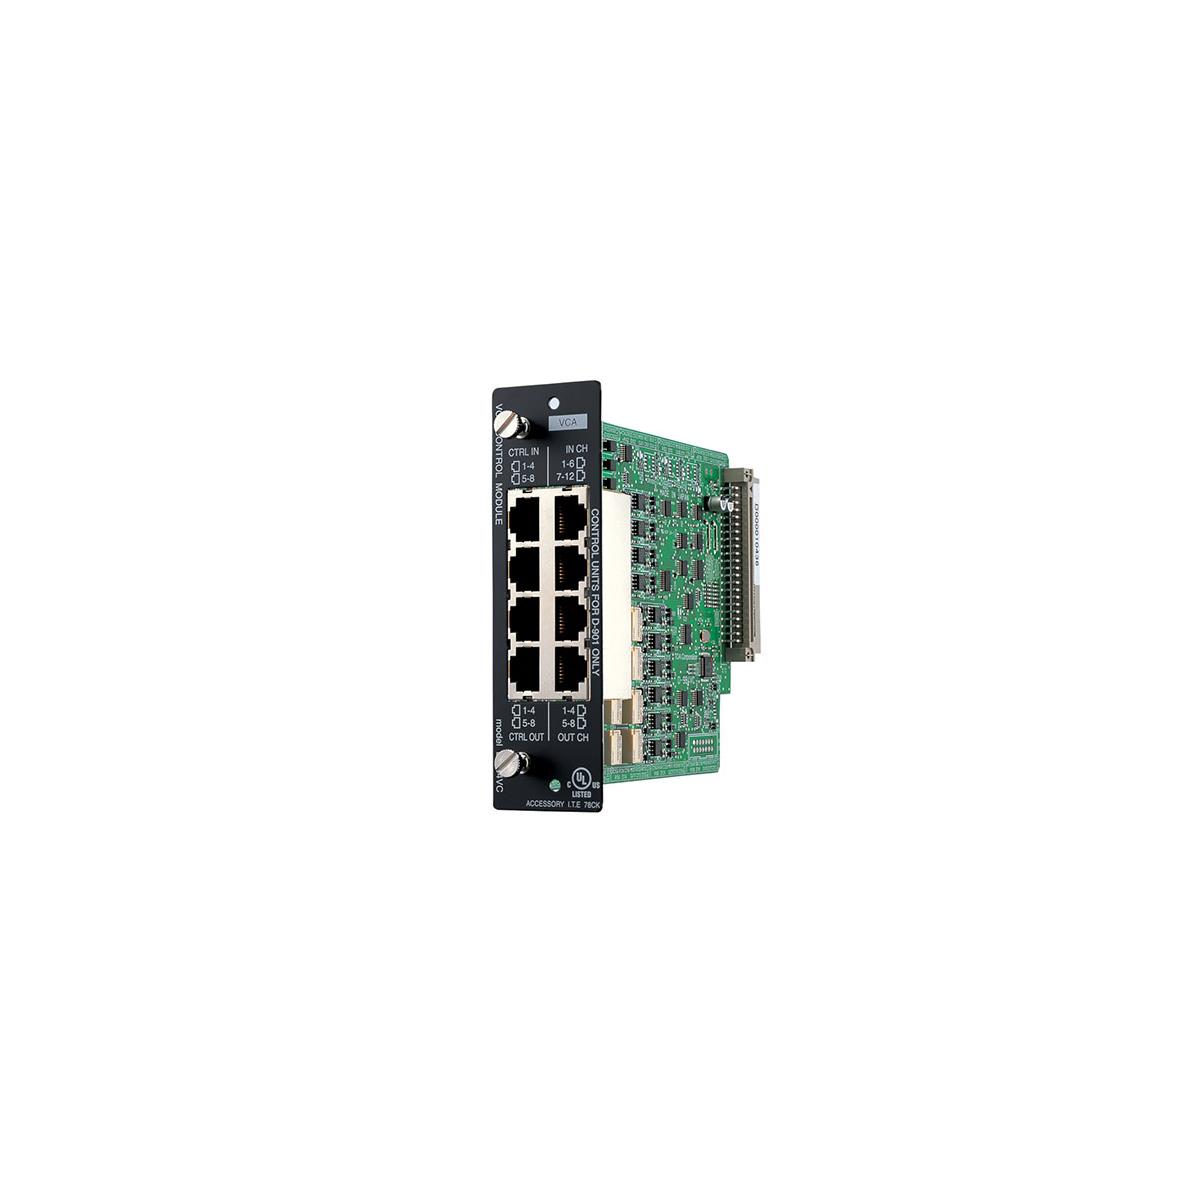 Image of TOA Electronics 12/8 Input/Output VCA Control Module for D-901 and D-911 Mixers